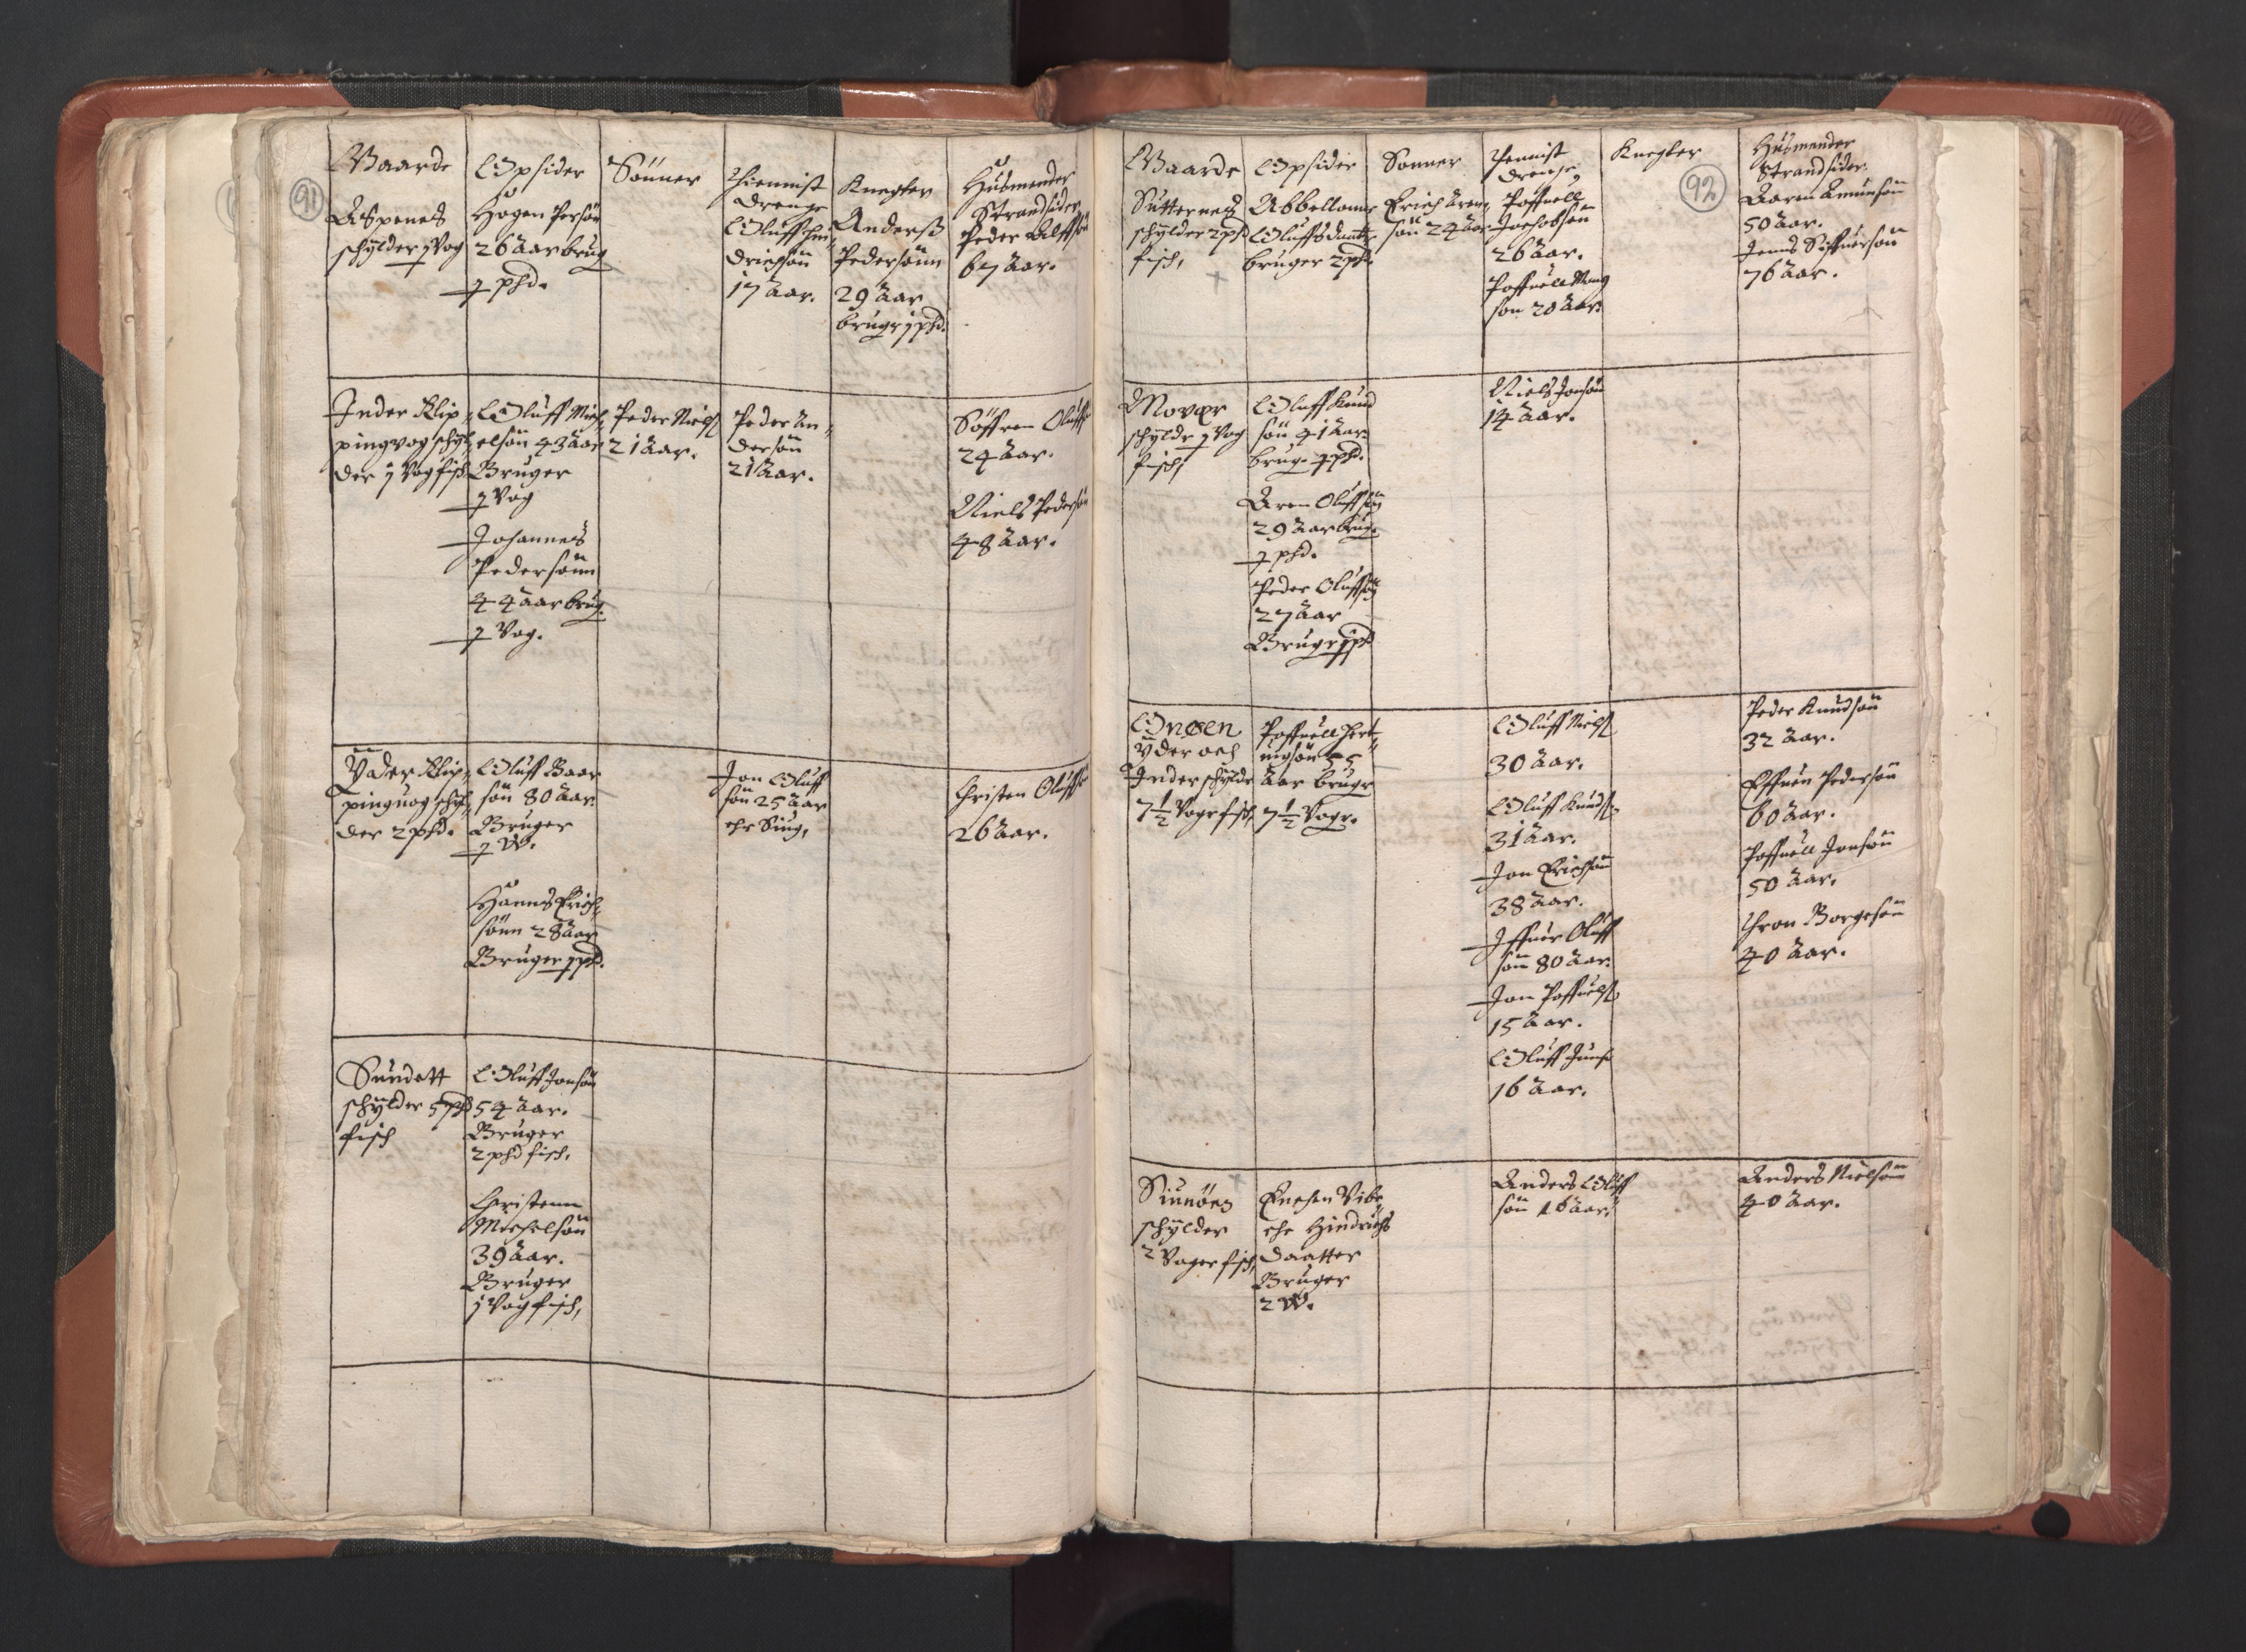 RA, Vicar's Census 1664-1666, no. 35: Helgeland deanery and Salten deanery, 1664-1666, p. 91-92